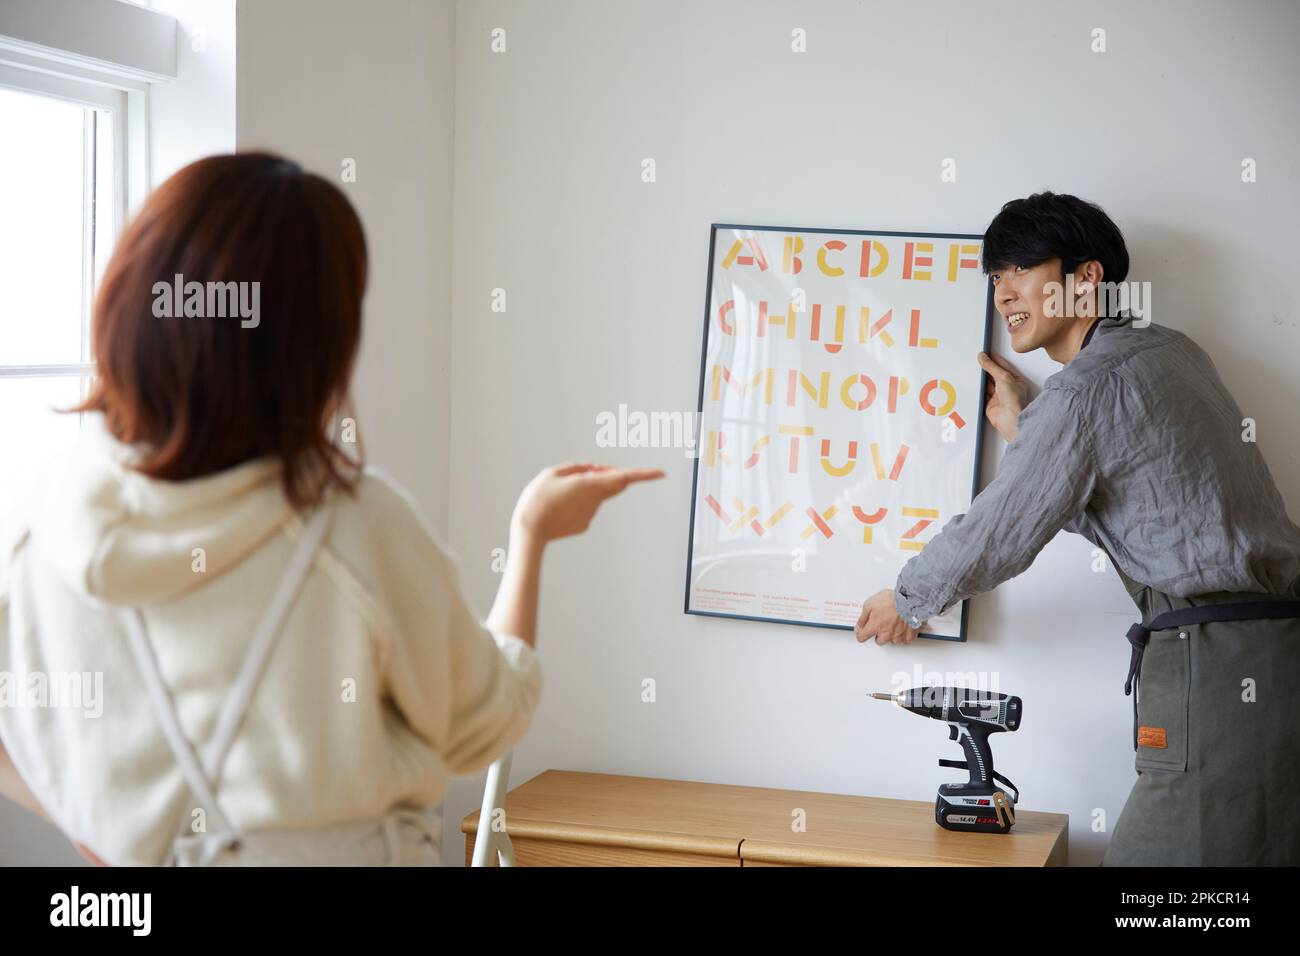 A man and a woman deciding where to place a forehead Stock Photo